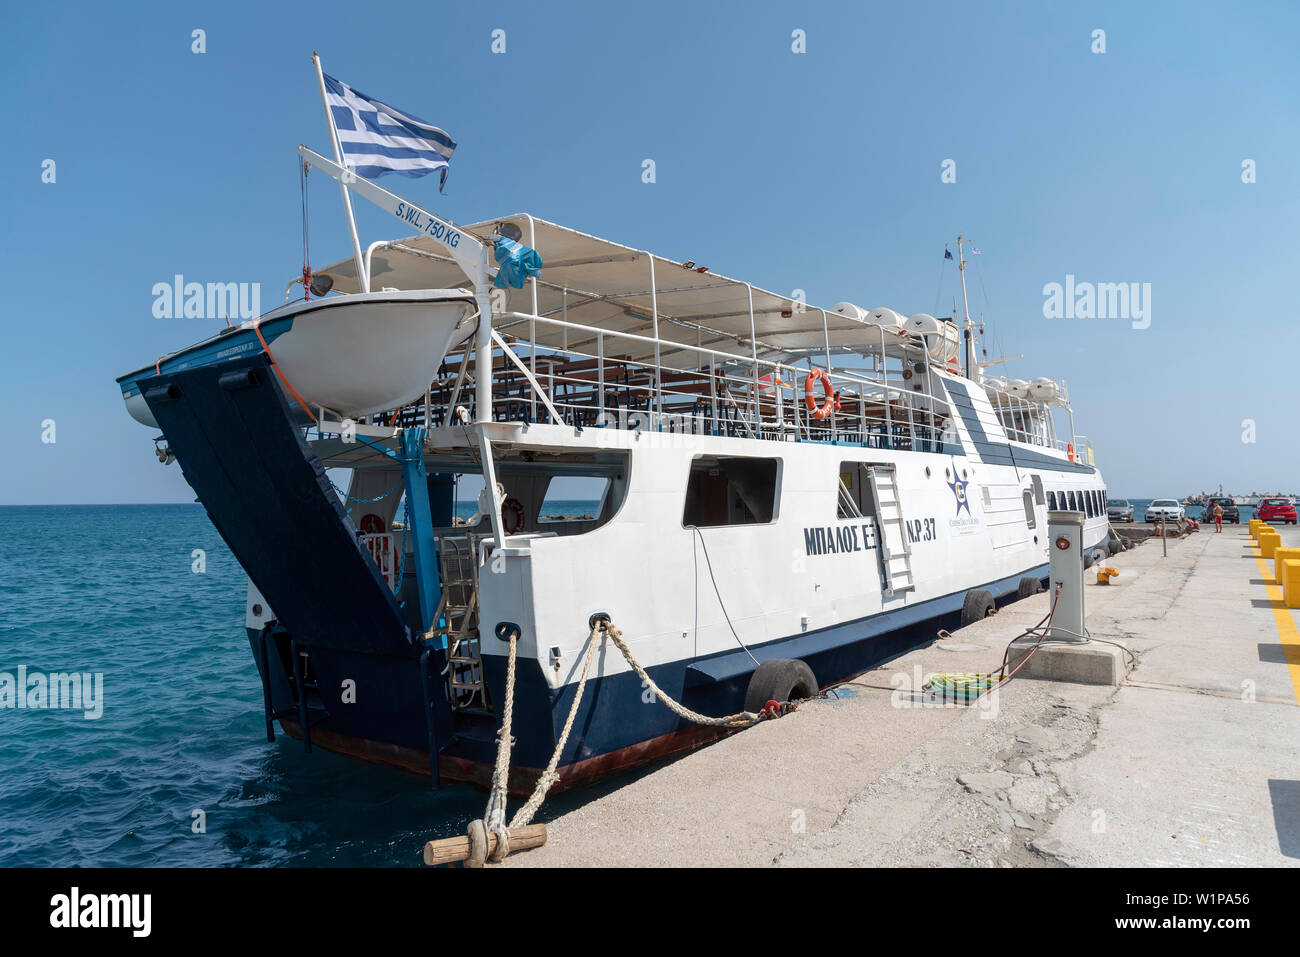 Ierapetra, Crete, Greece. June 2019. A ferry the Balos Express which sails to Chrissi Island berthed in the harbour at Ierapetra Stock Photo